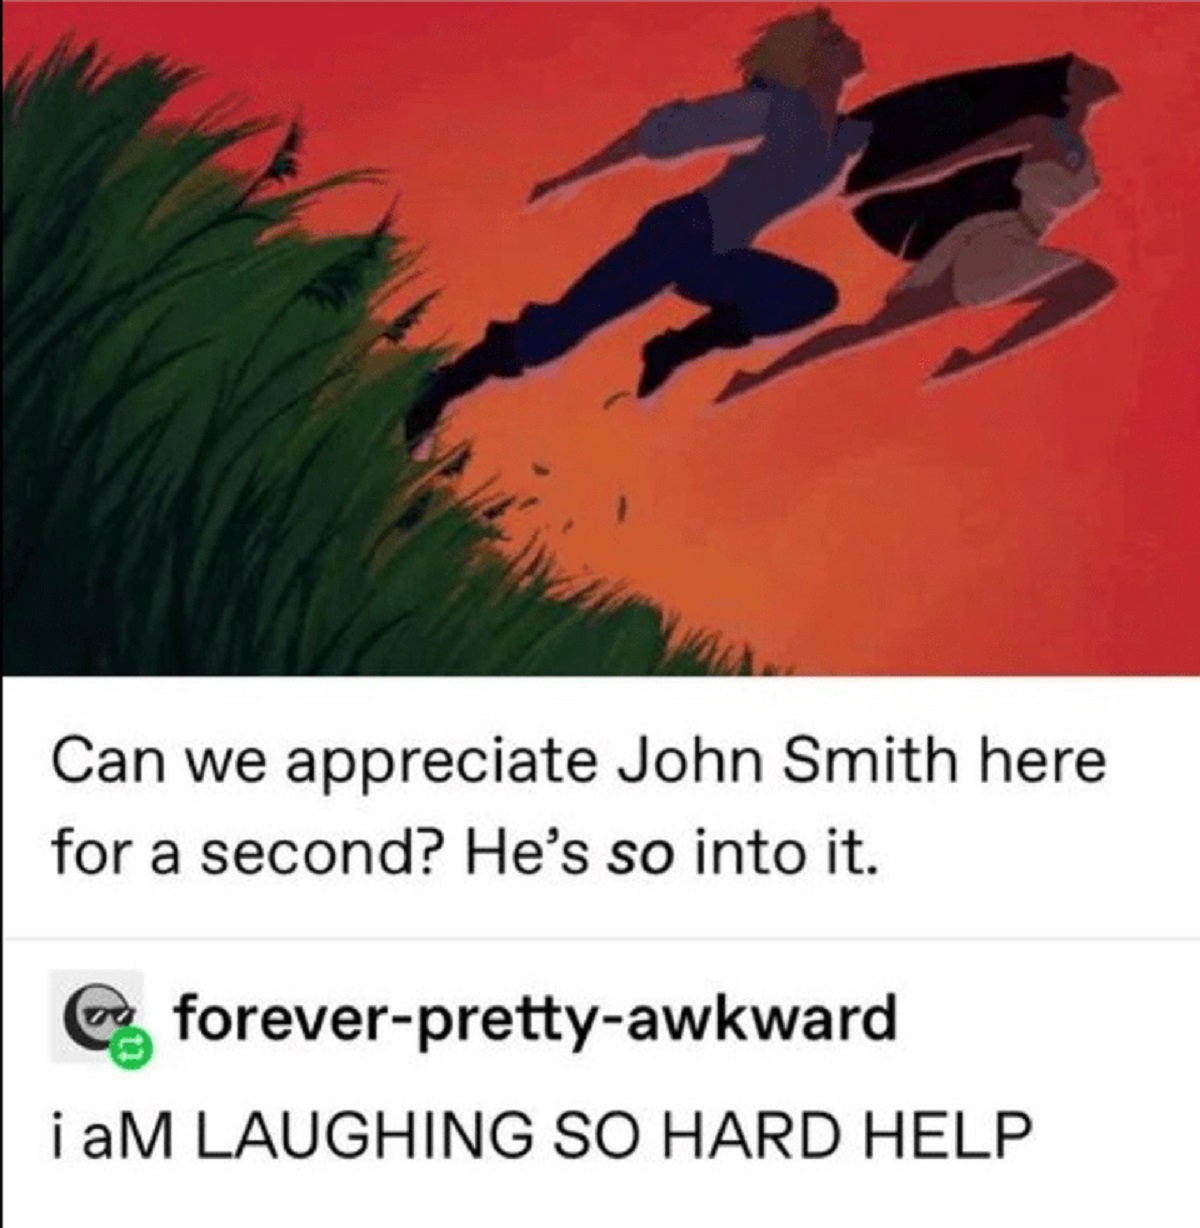 john smith pocahontas meme - Can we appreciate John Smith here for a second? He's so into it. foreverprettyawkward i aM Laughing So Hard Help